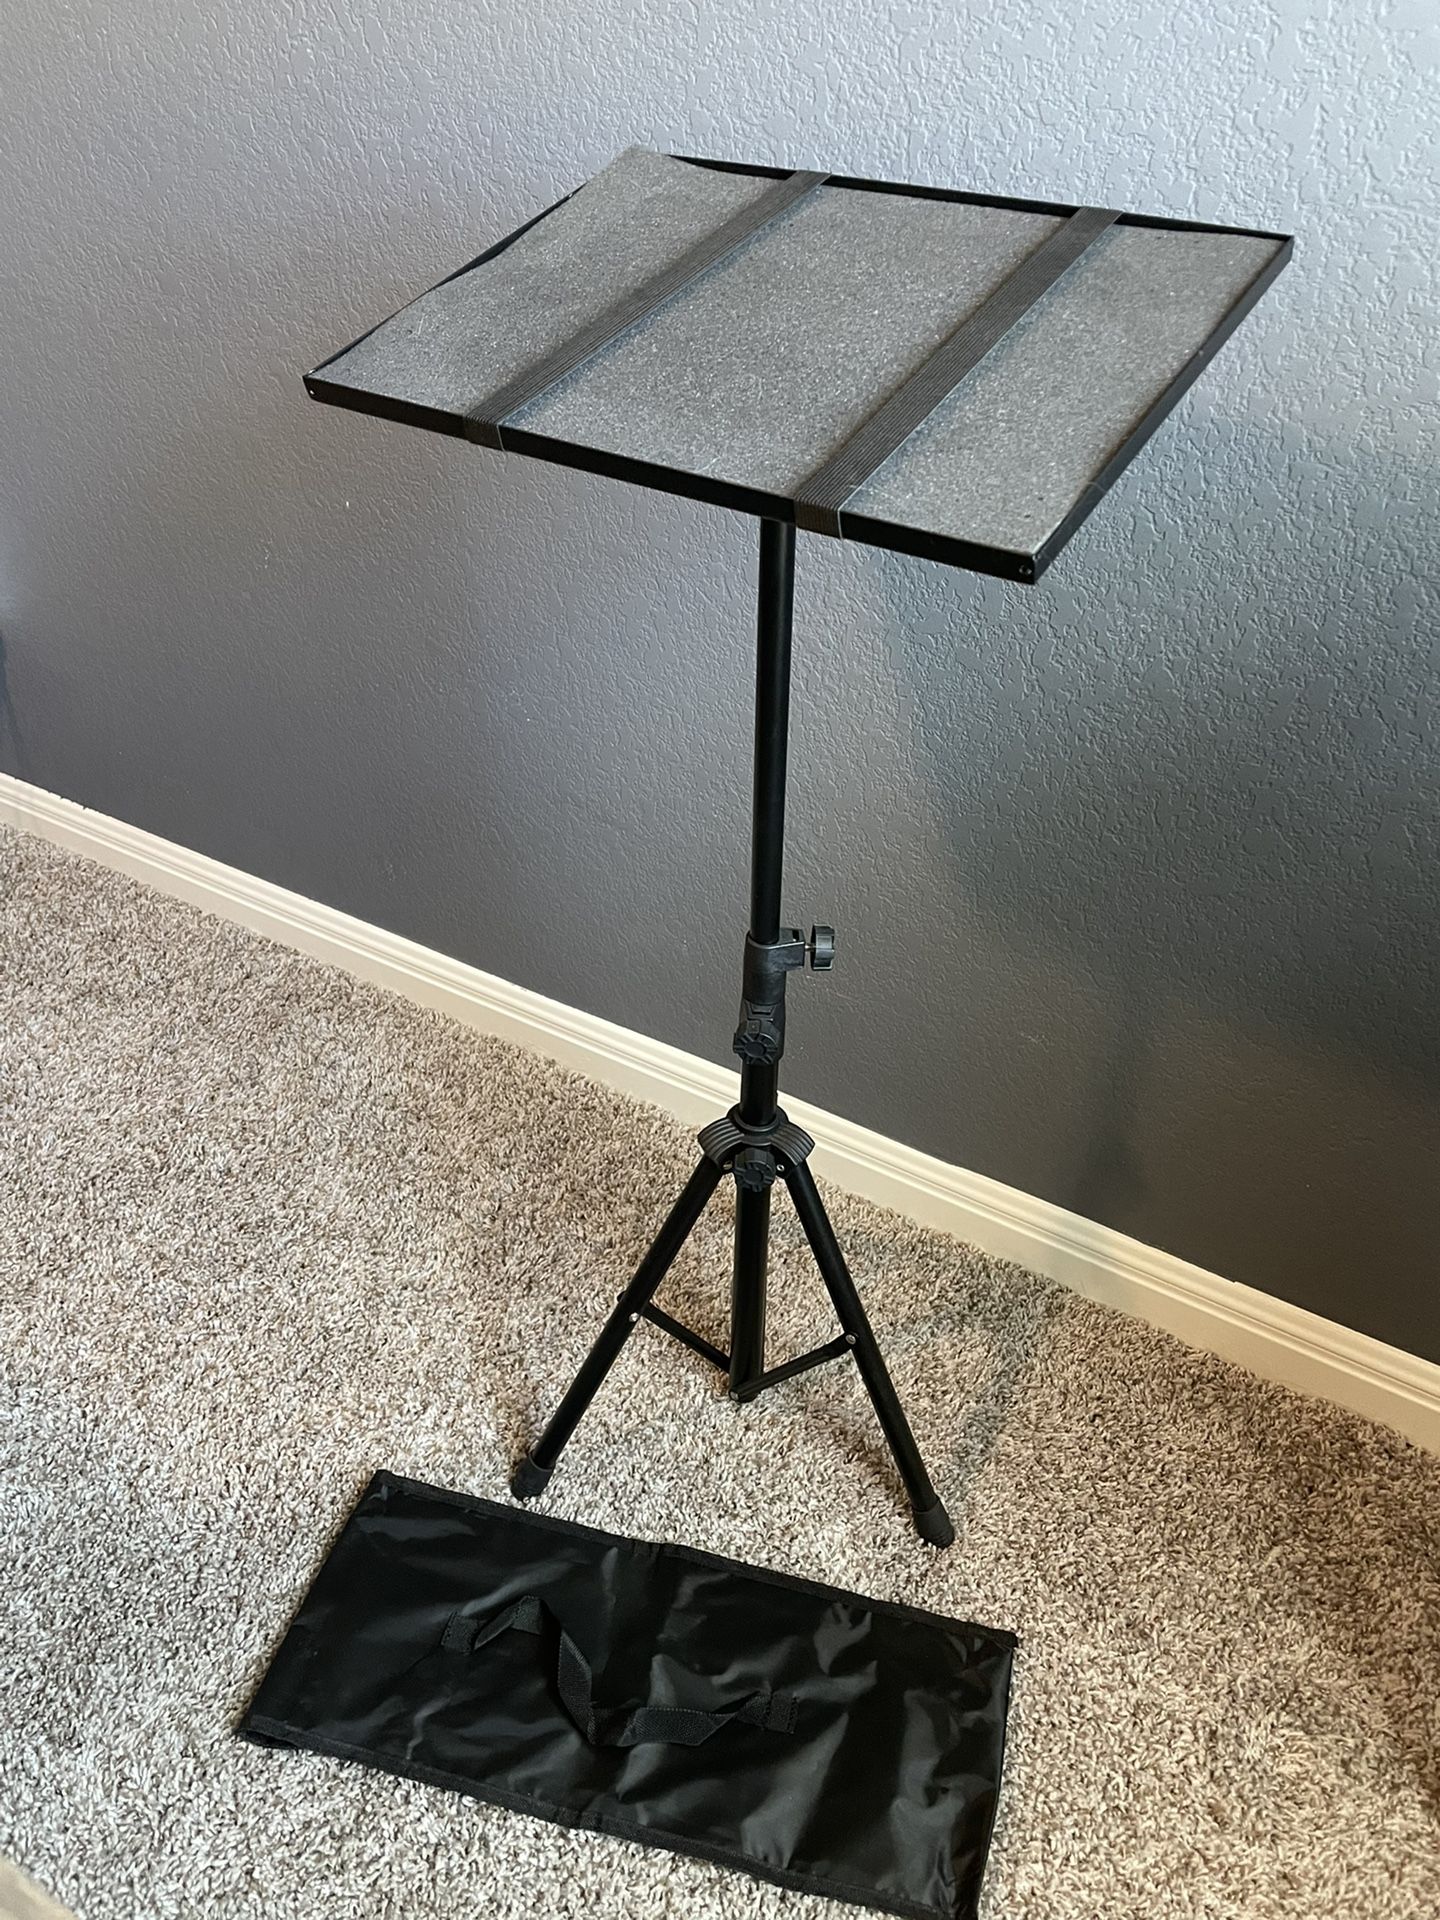 Projector stand